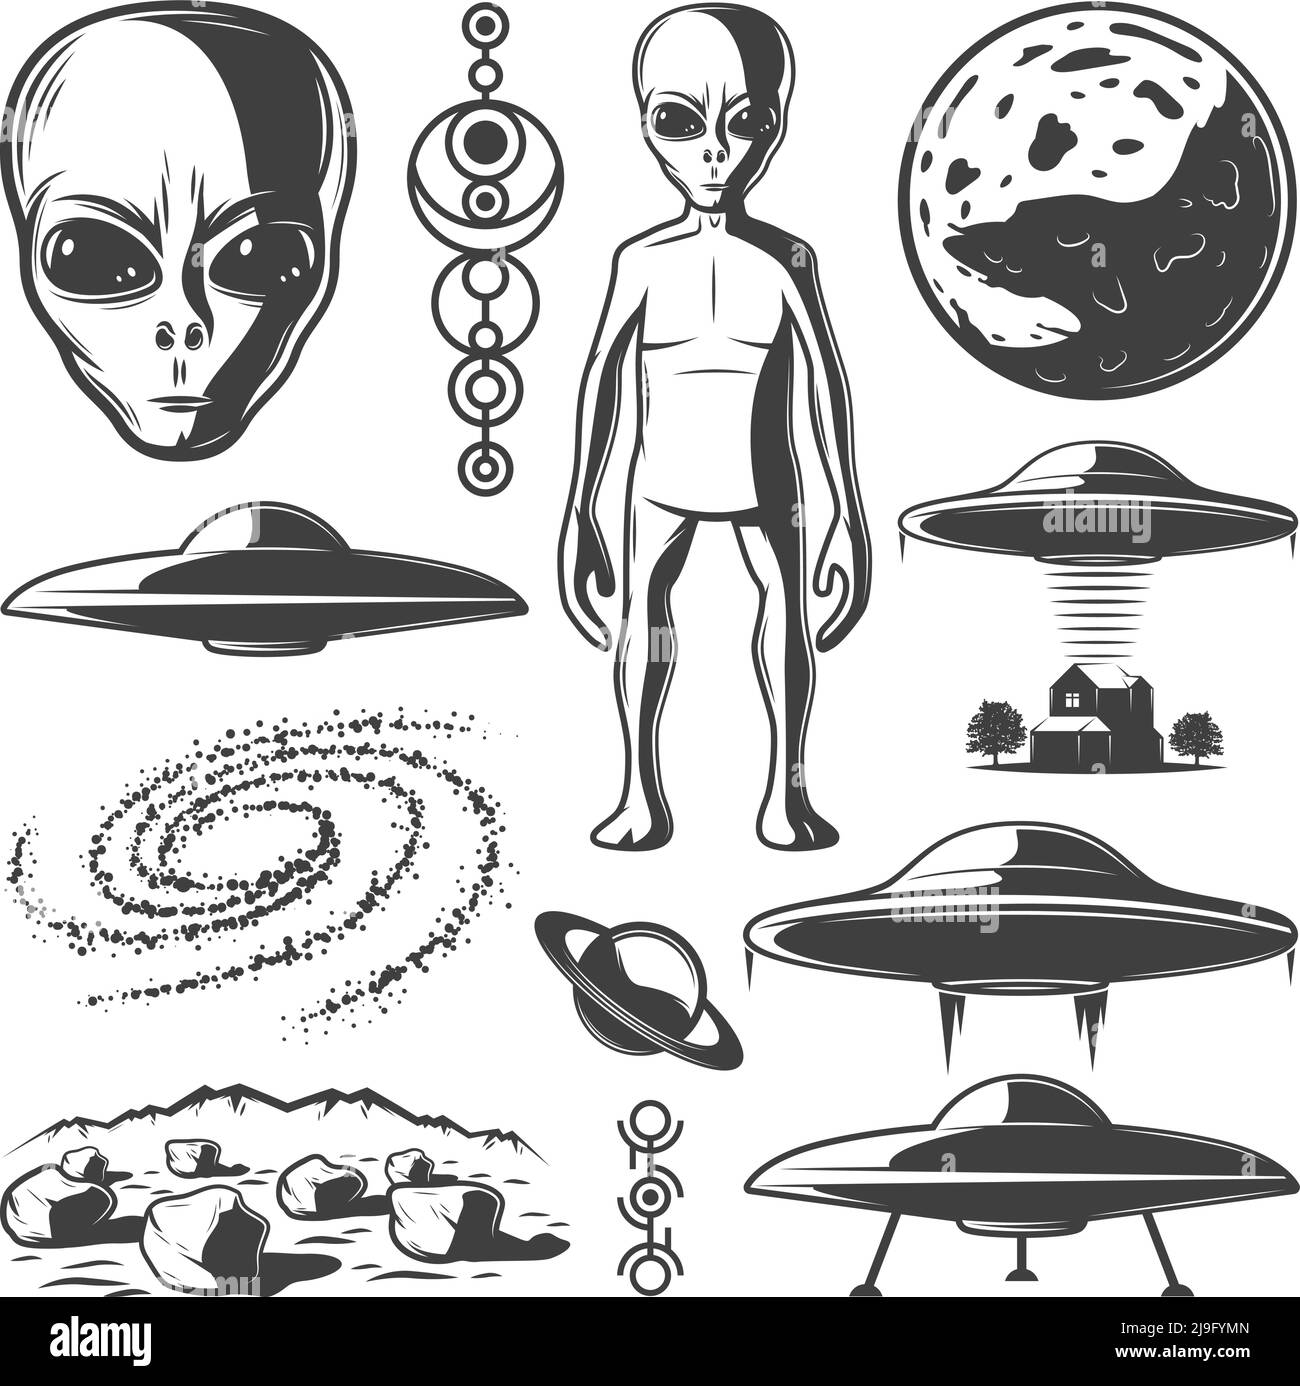 Vintage monochrome UFO elements set with extraterrestrials planet surface landscape galaxy alien ships human abducting from house isolated vector illu Stock Vector